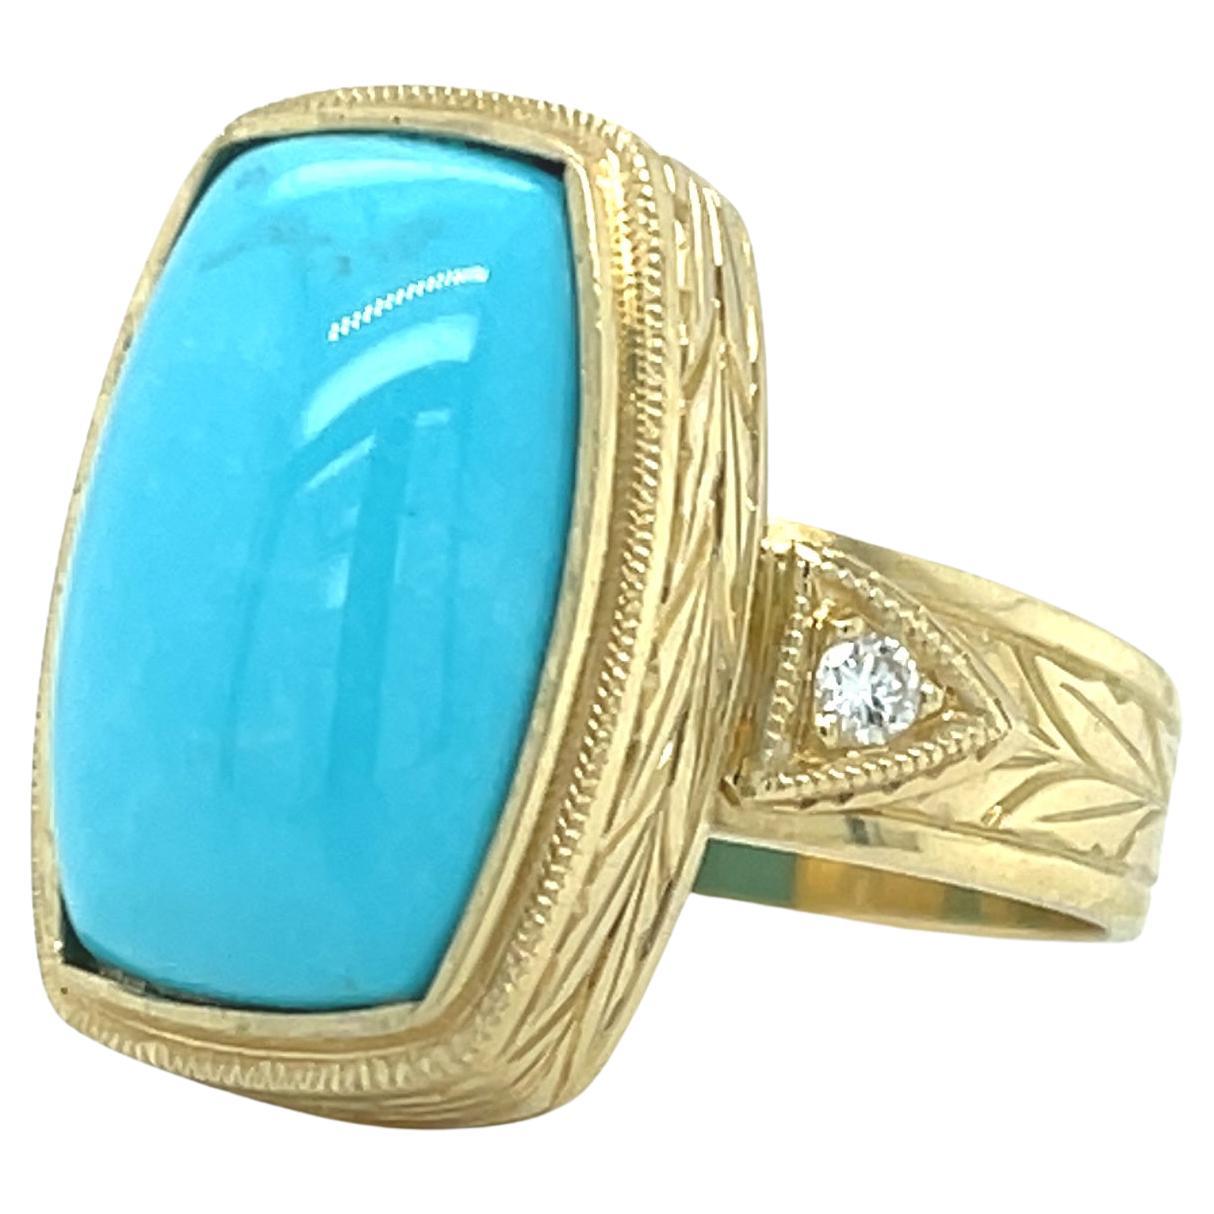 This handsome 18k yellow gold handcrafted ring features a gorgeous, 4.46 carat cushion-shaped turquoise cabochon from Arizona's world renowned Sleeping Beauty turquoise mine. Sleeping Beauty turquoise is highly-prized for its stunningly uniform,